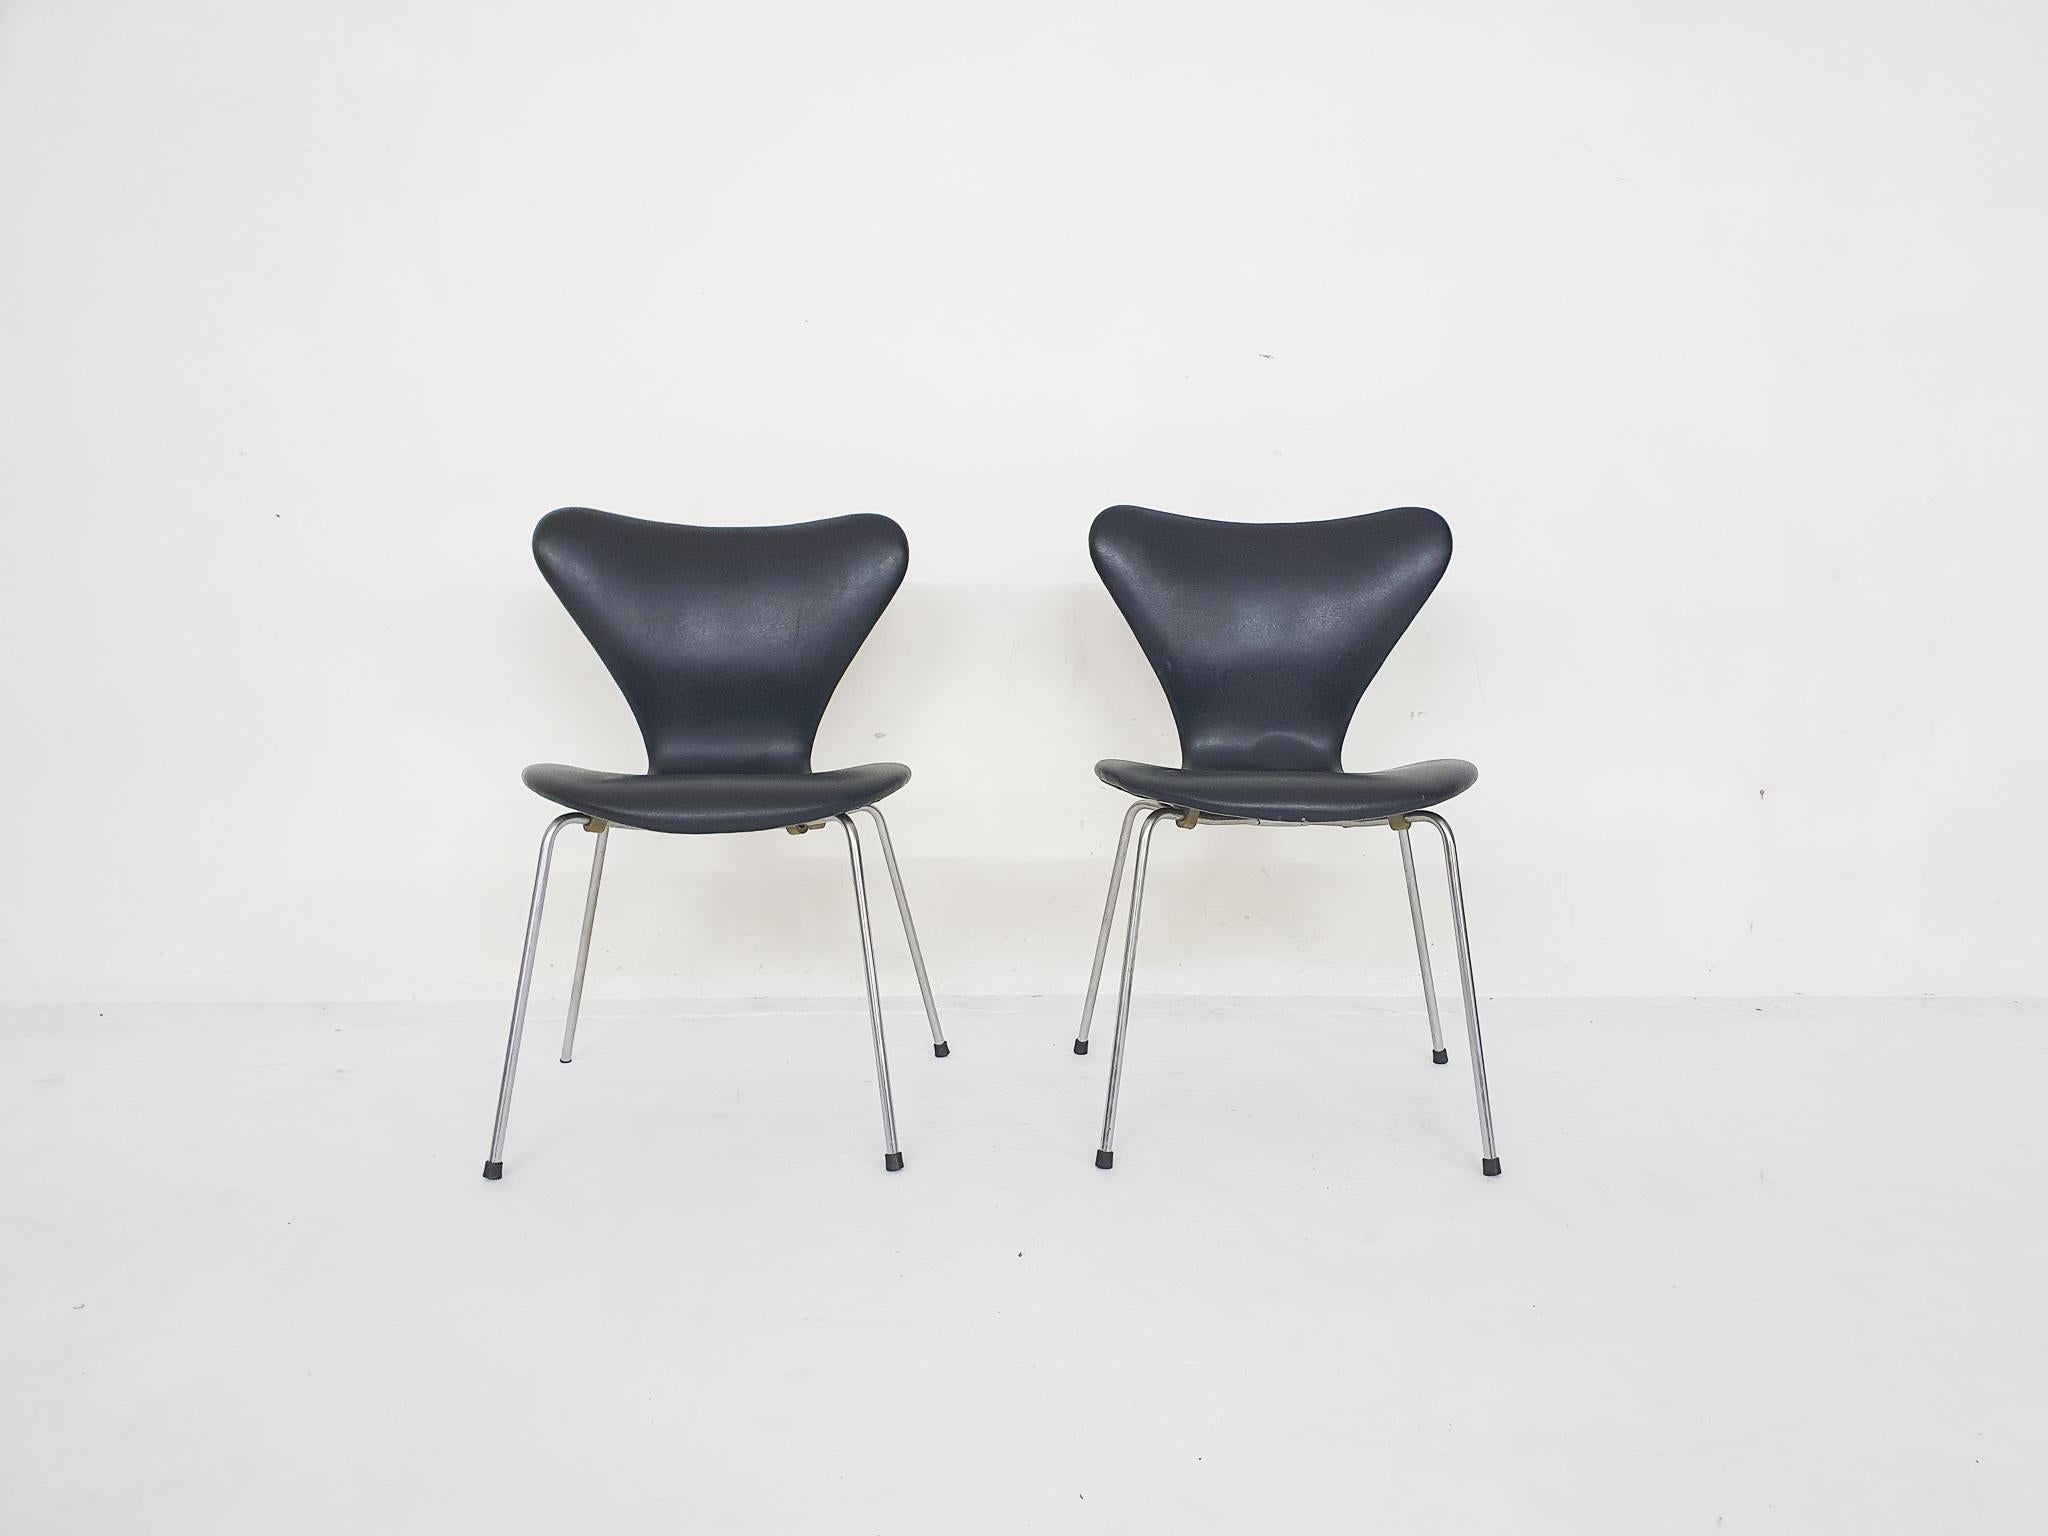 Set of 2 model 3107 dining chairs by Arne Jacobsen for Fritz Hansen, 1955 For Sale 3